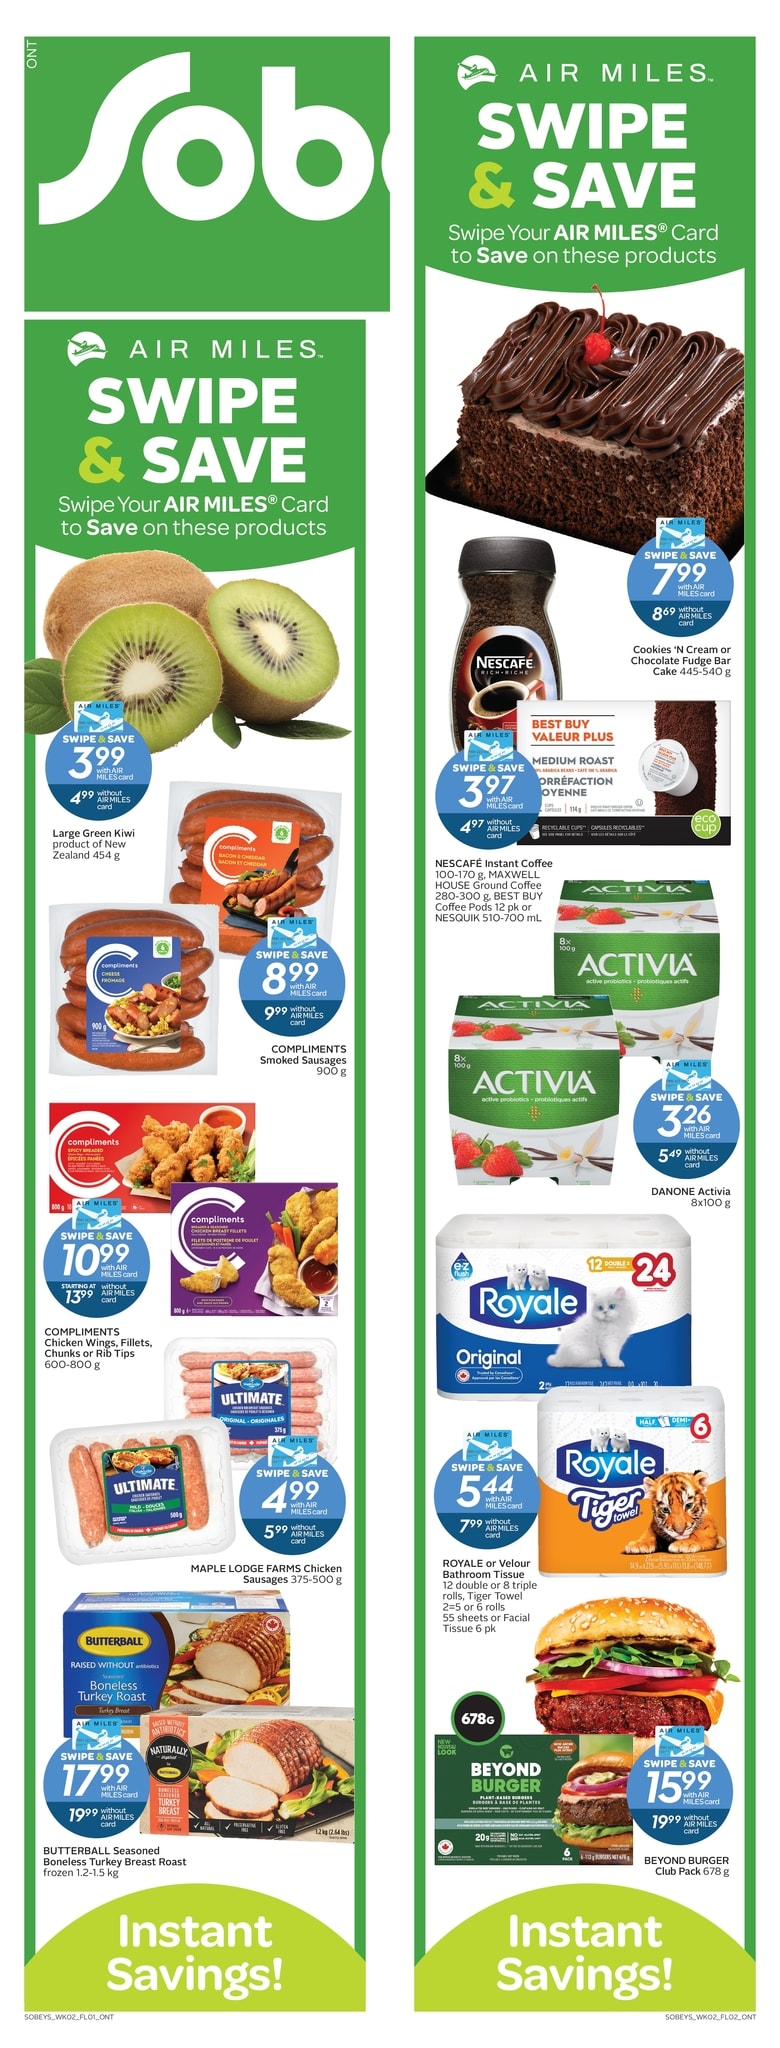 Sobeys - Weekly Flyer Specials - Page 1